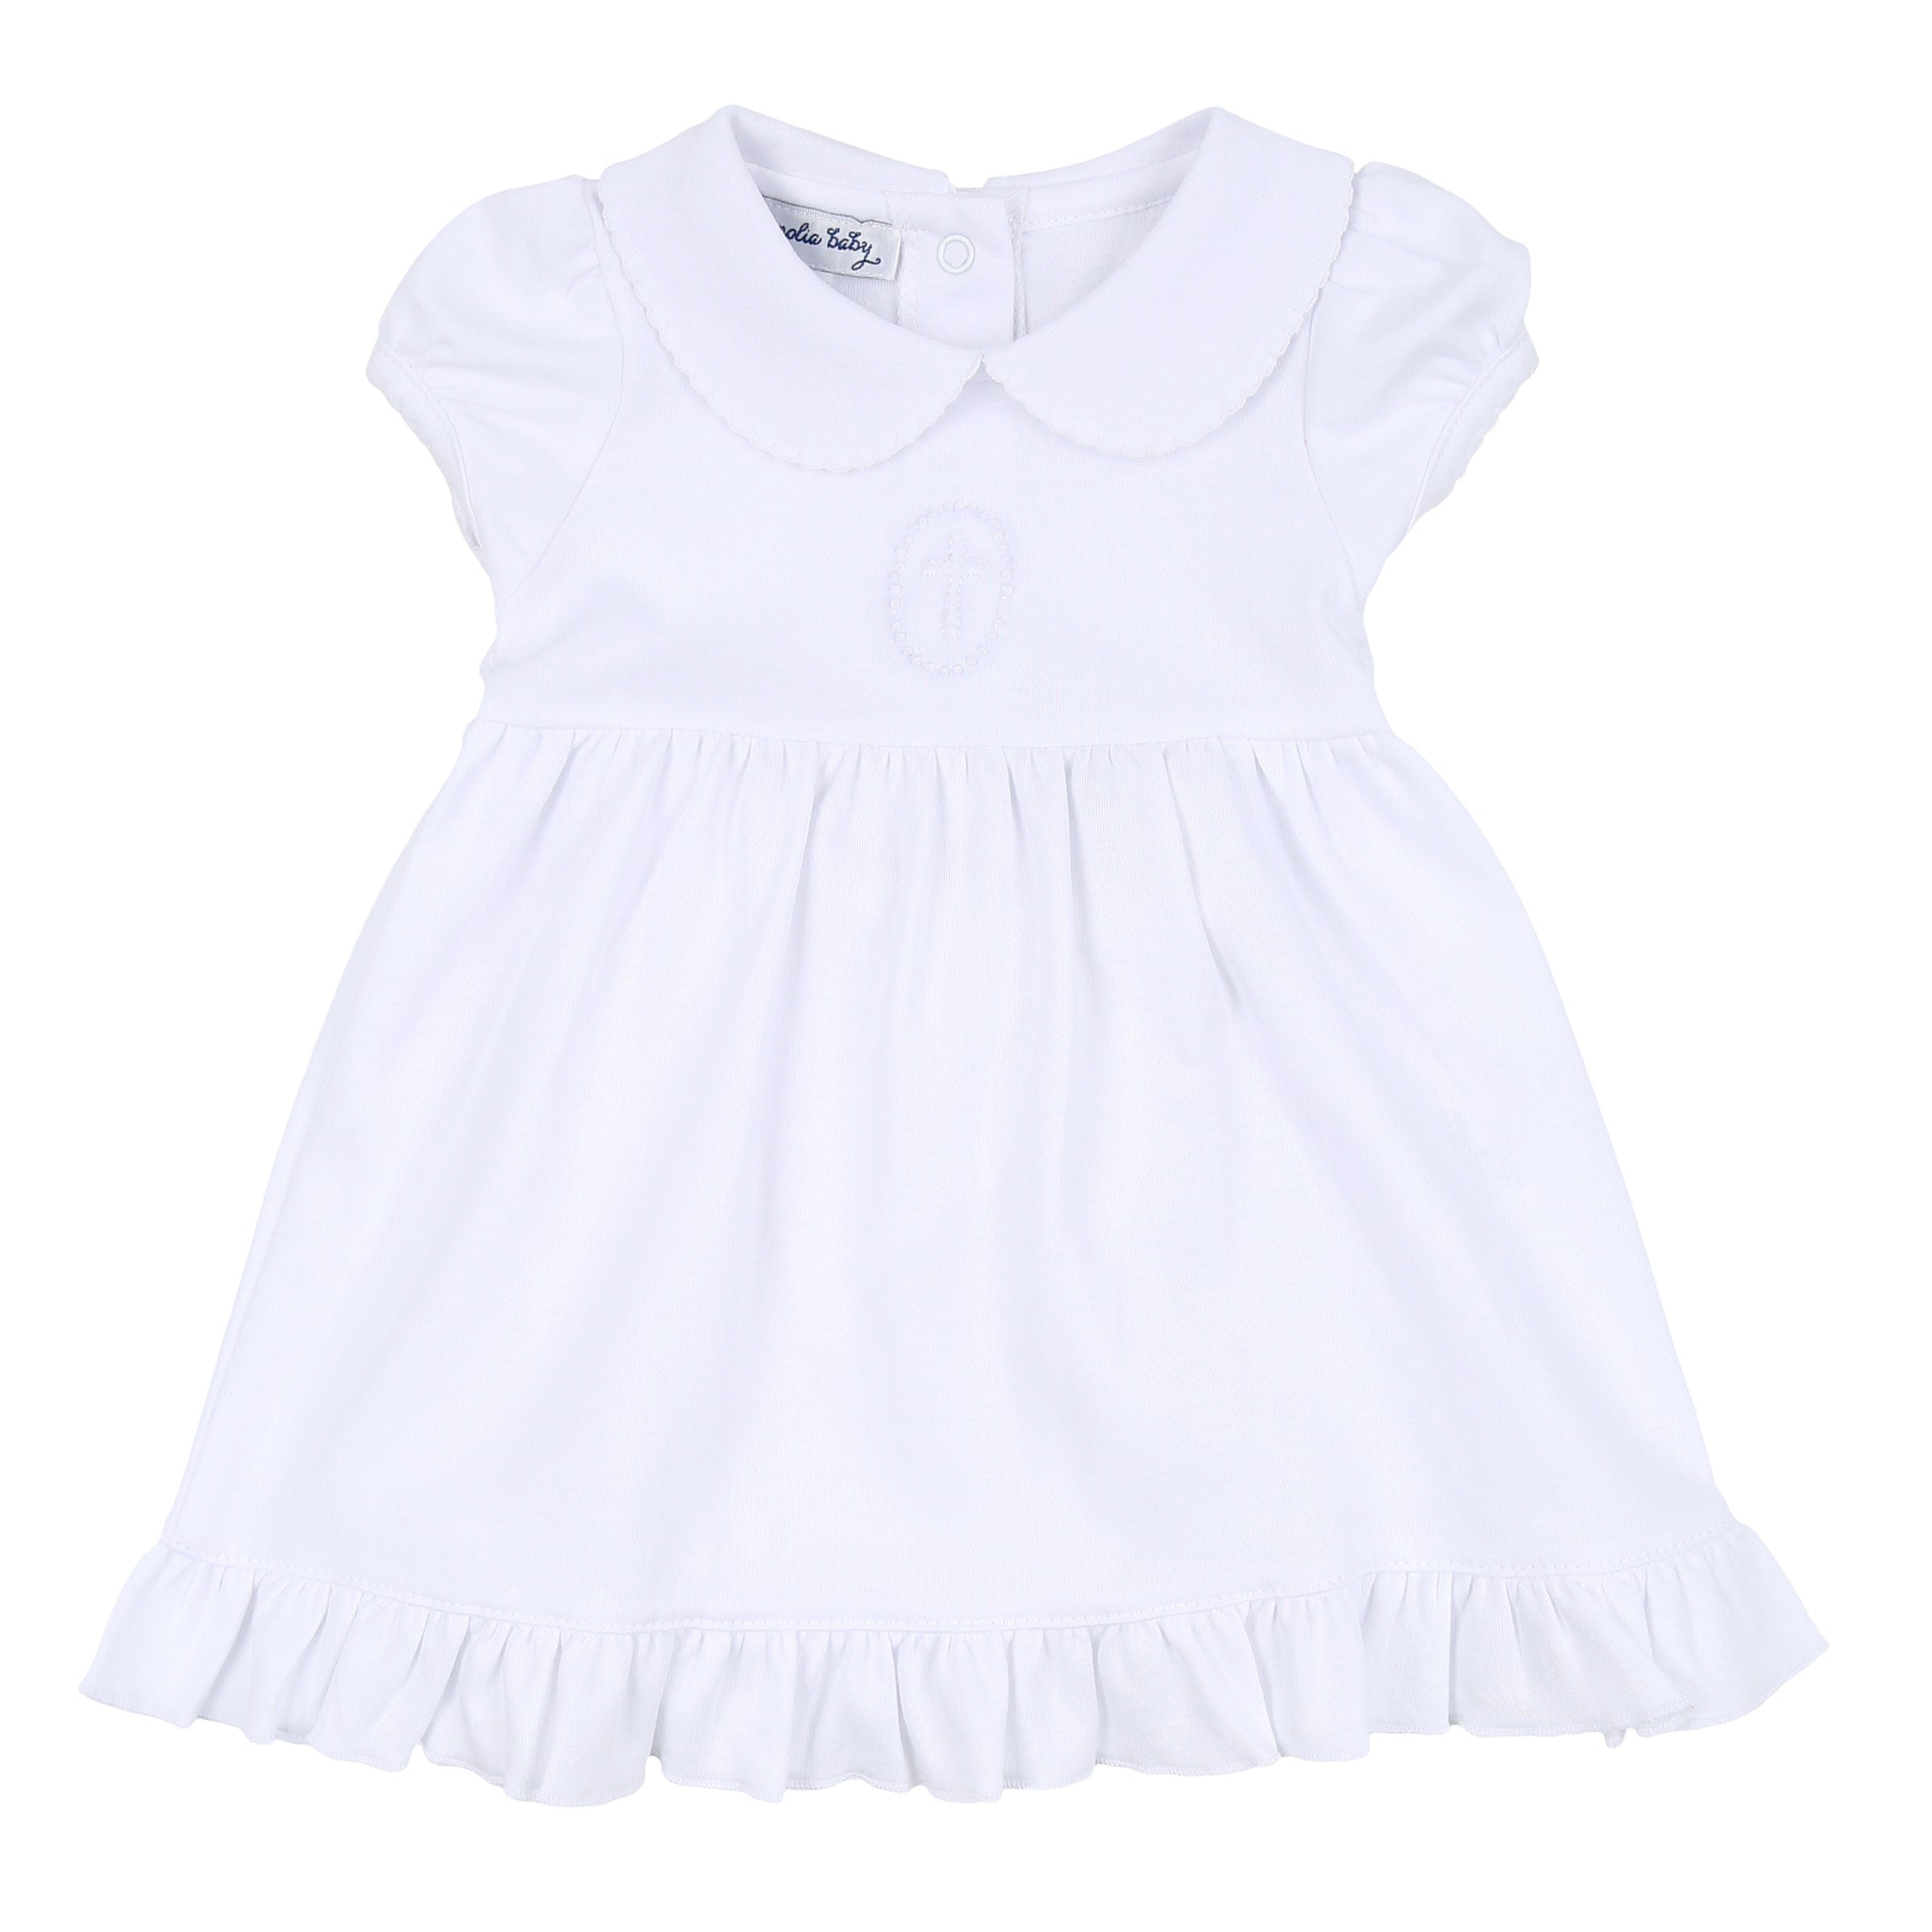 MAGNOLIA BABY - Blessed Embroidered Dress Set - White